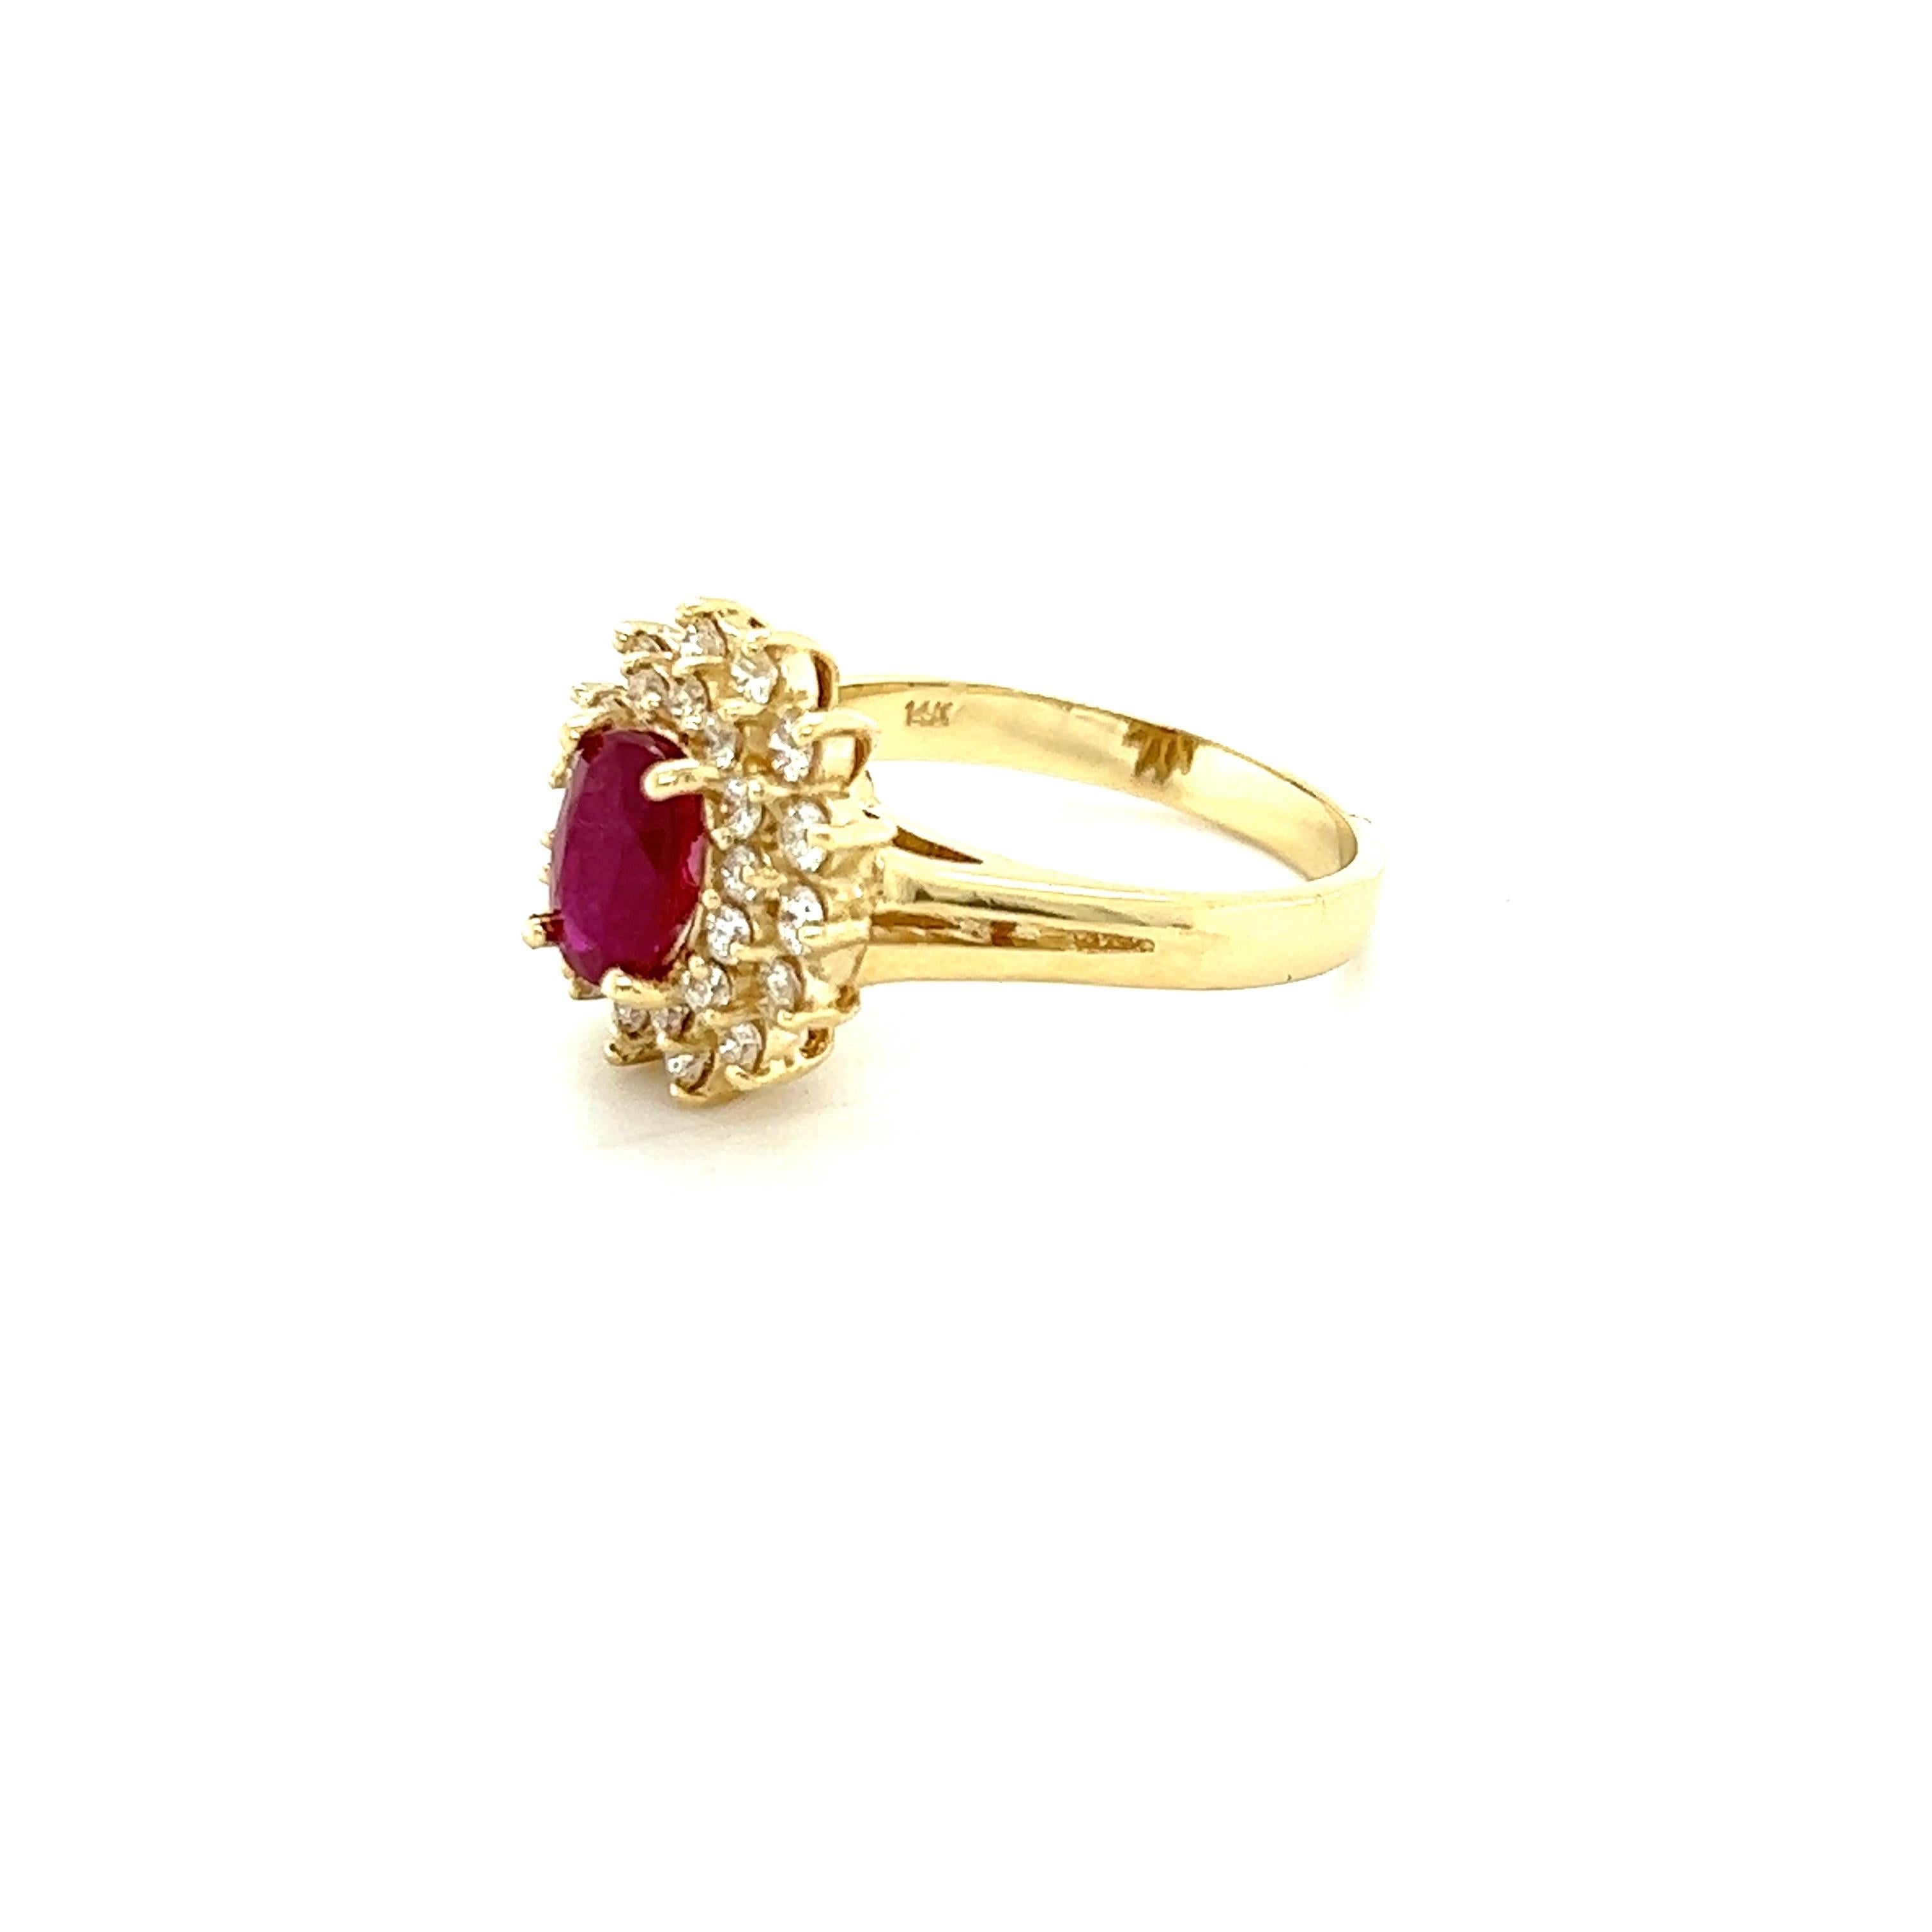 1.63 Carat Ruby Diamond 14 Karat Yellow Gold Ring In New Condition For Sale In Los Angeles, CA